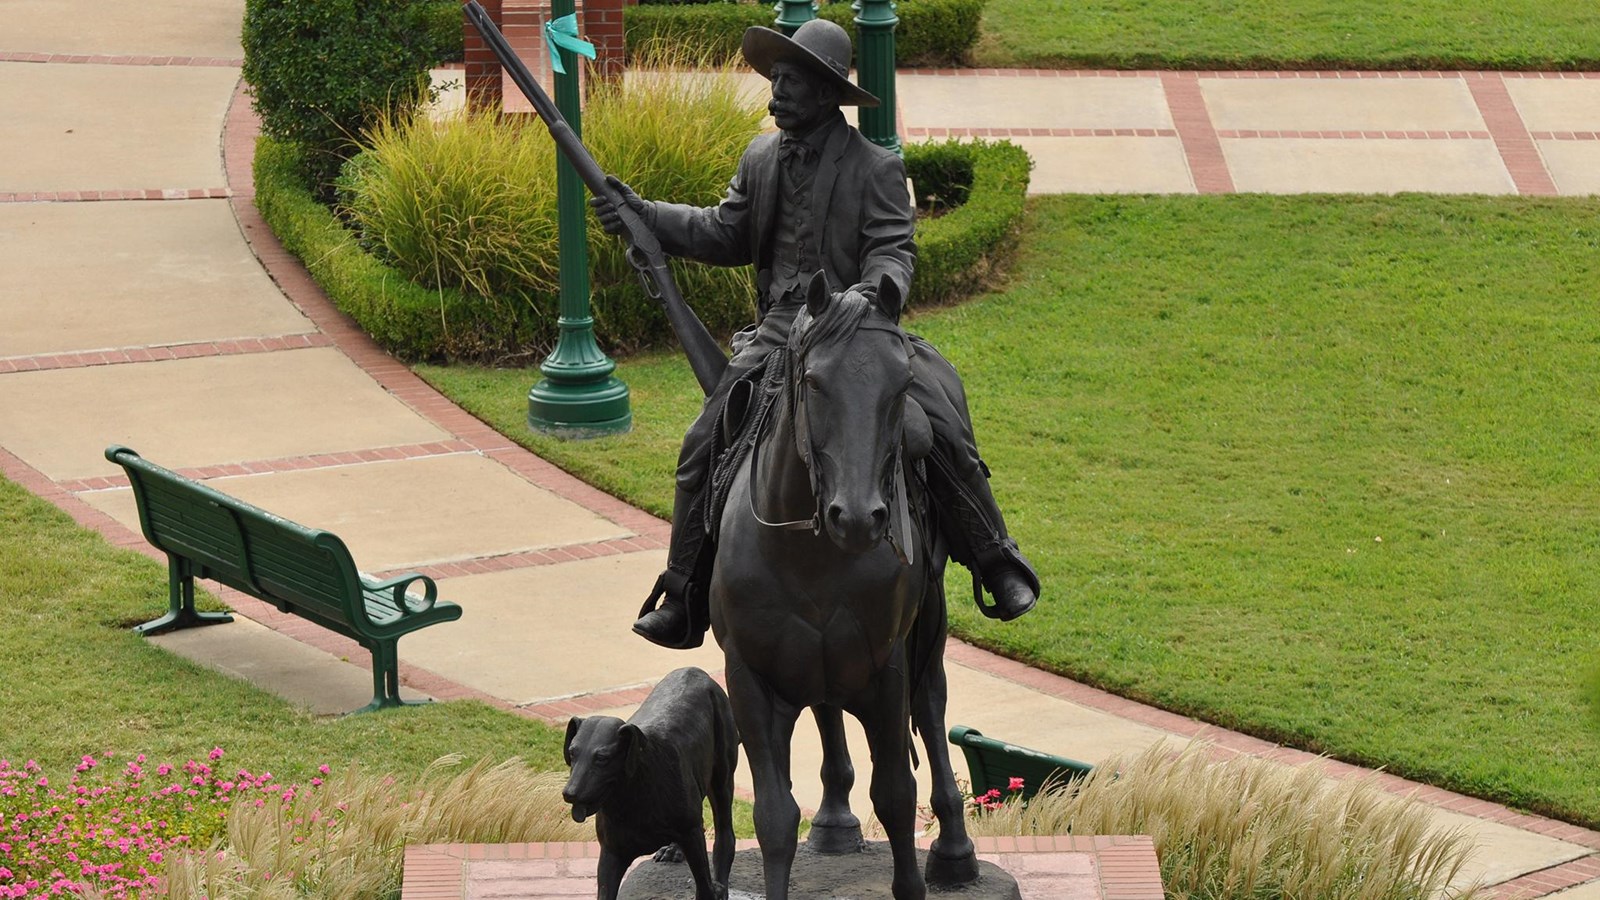 Aerial view of a Statue man riding a horse carrying a rifle